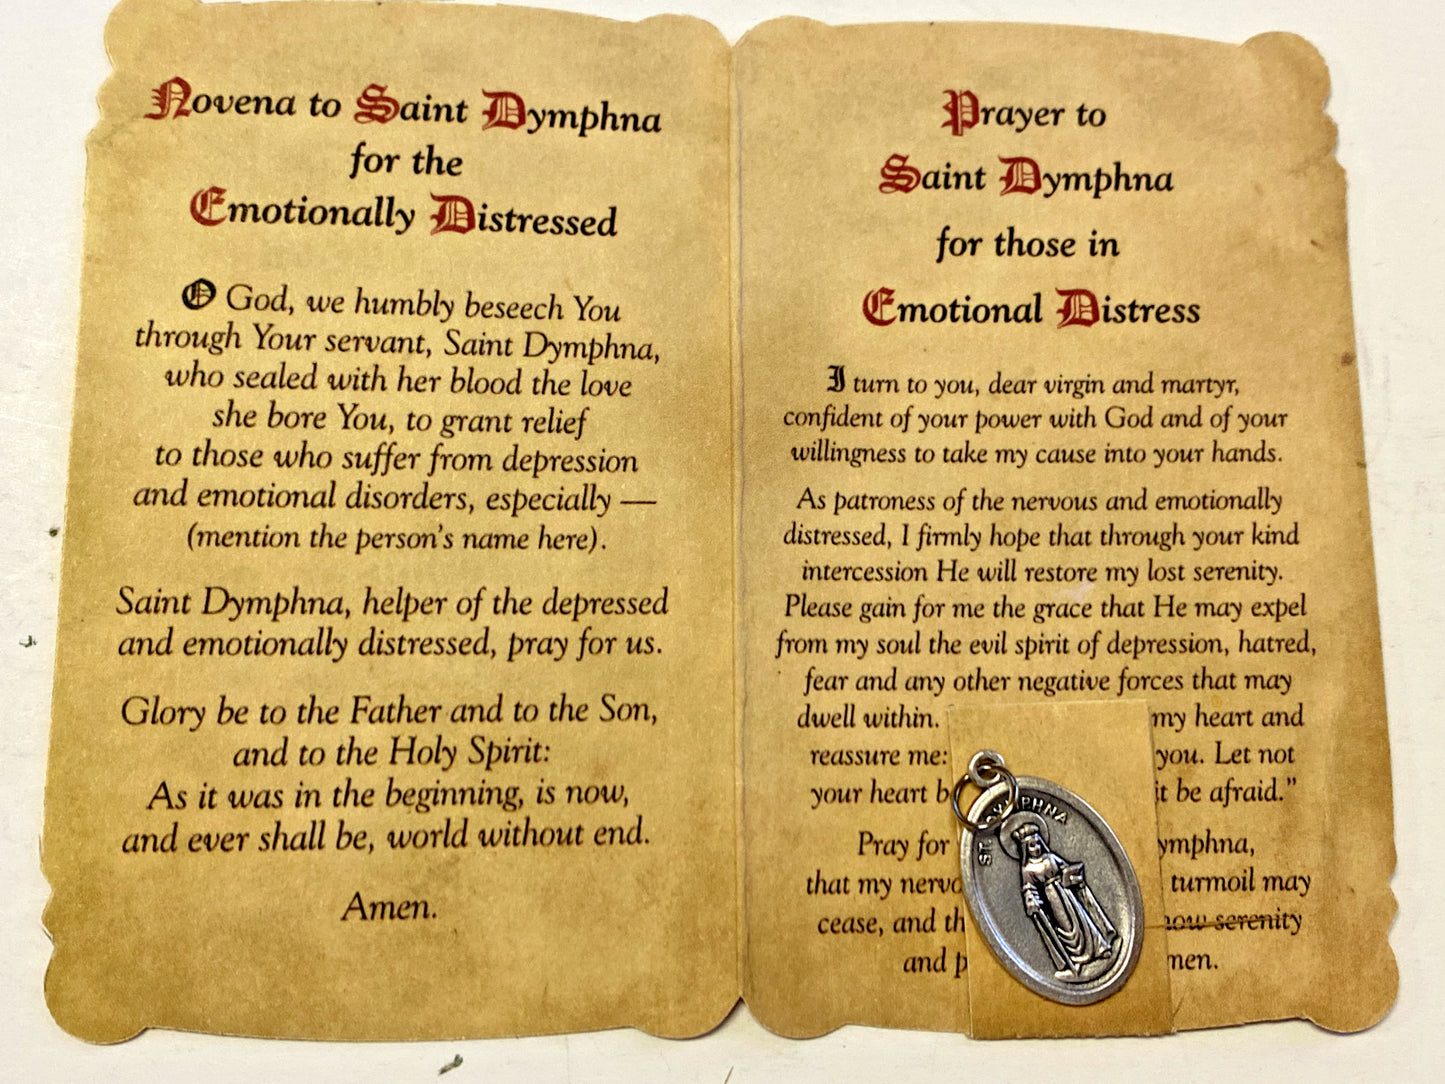 Saint Dymphna Patron of  Emotional Disorders Prayer Card  Medal, New from Italy - Bob and Penny Lord